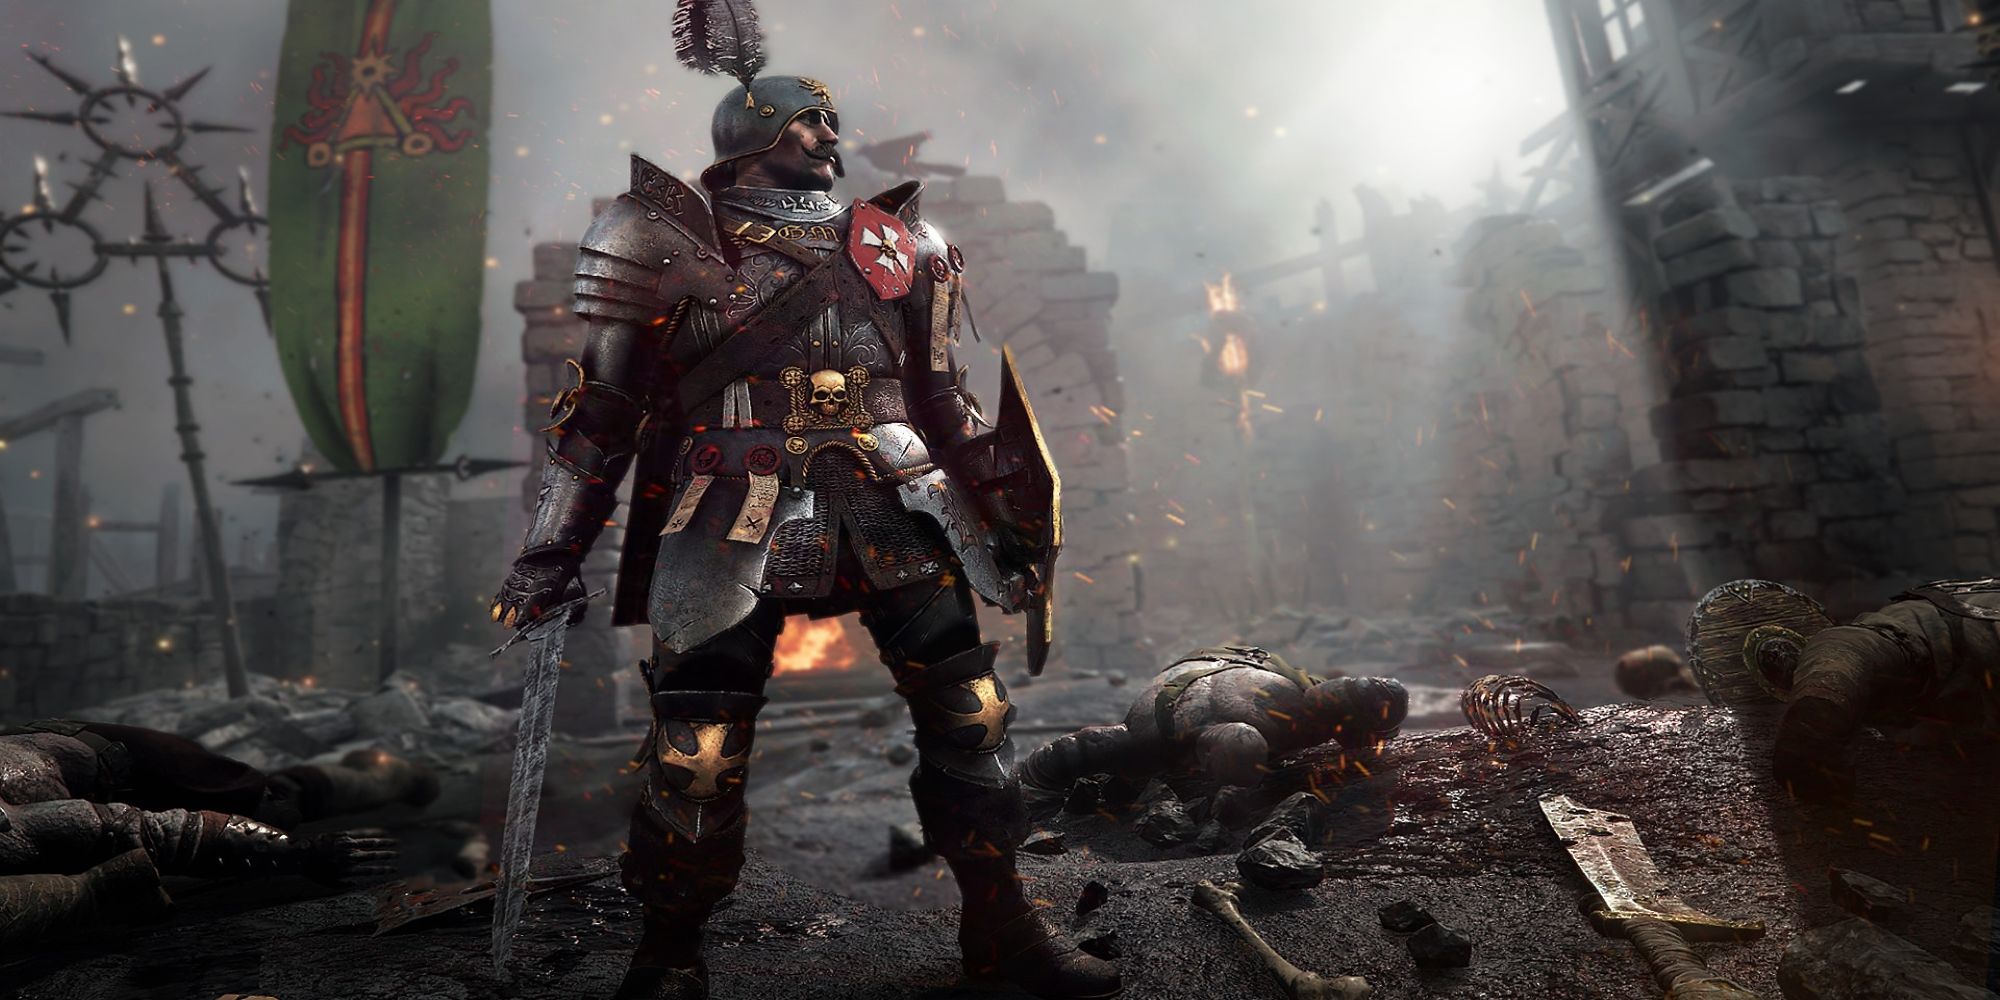 In-Game Screenshot From Vermintide 2 Of A Knight Standing In The Aftermath Of A Battle